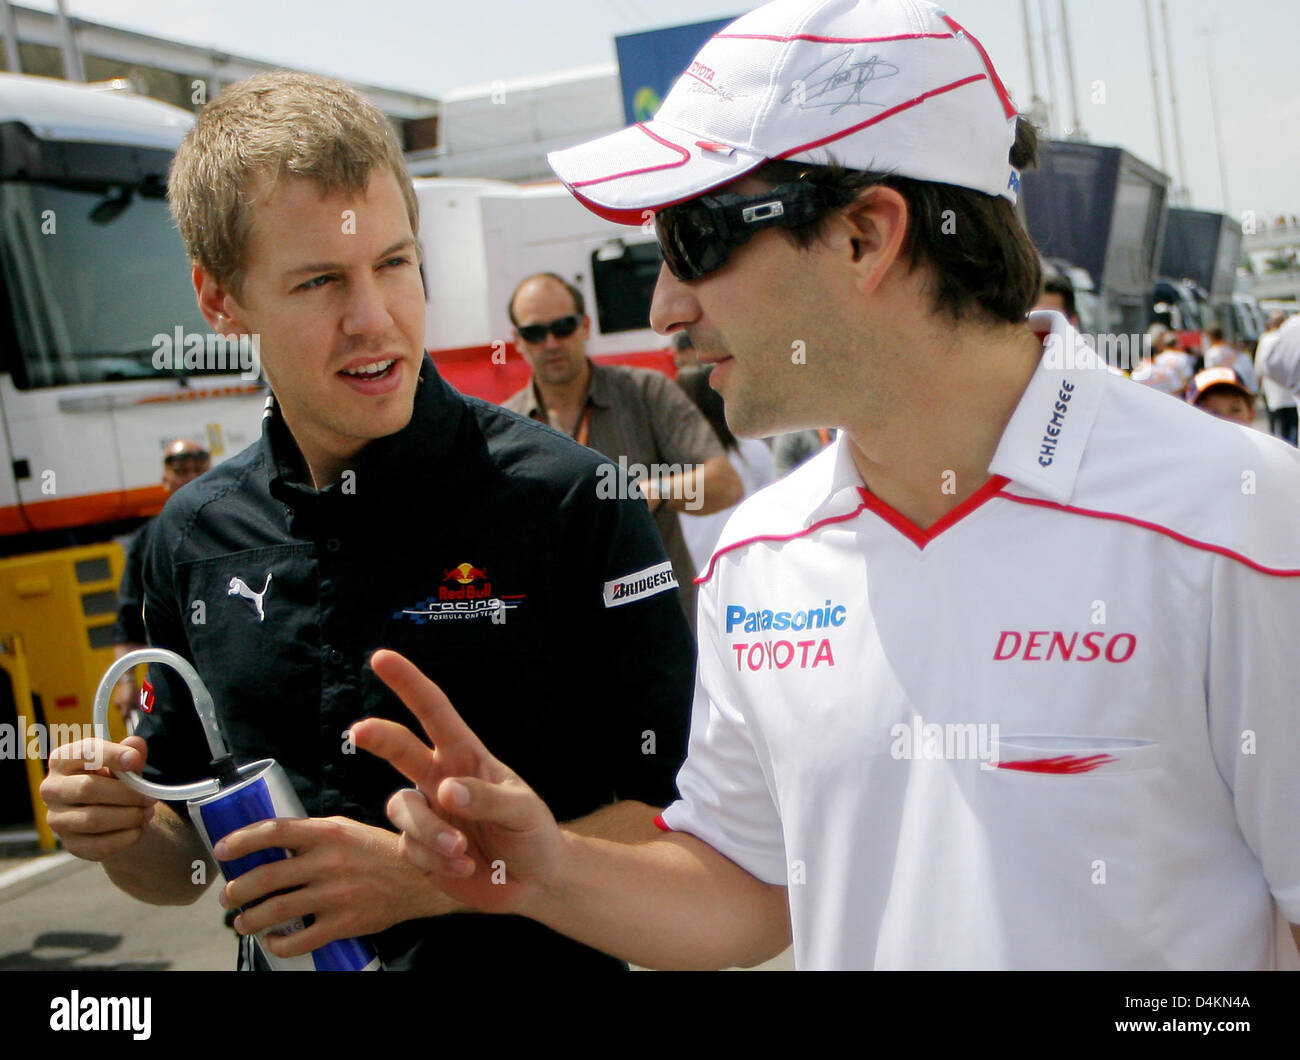 German Formula One driver Sebastian Vettel (L) of Red Bull Racing and German Formula One driver Timo Glock of Toyota Racing are pictured in the paddock prior to the start of the Formula One Grand Prix of Spain at Circuit de Catalunya in Montmelo near Barcelona, Spain, 10 May 2009. Photo: Jan Woitas Stock Photo